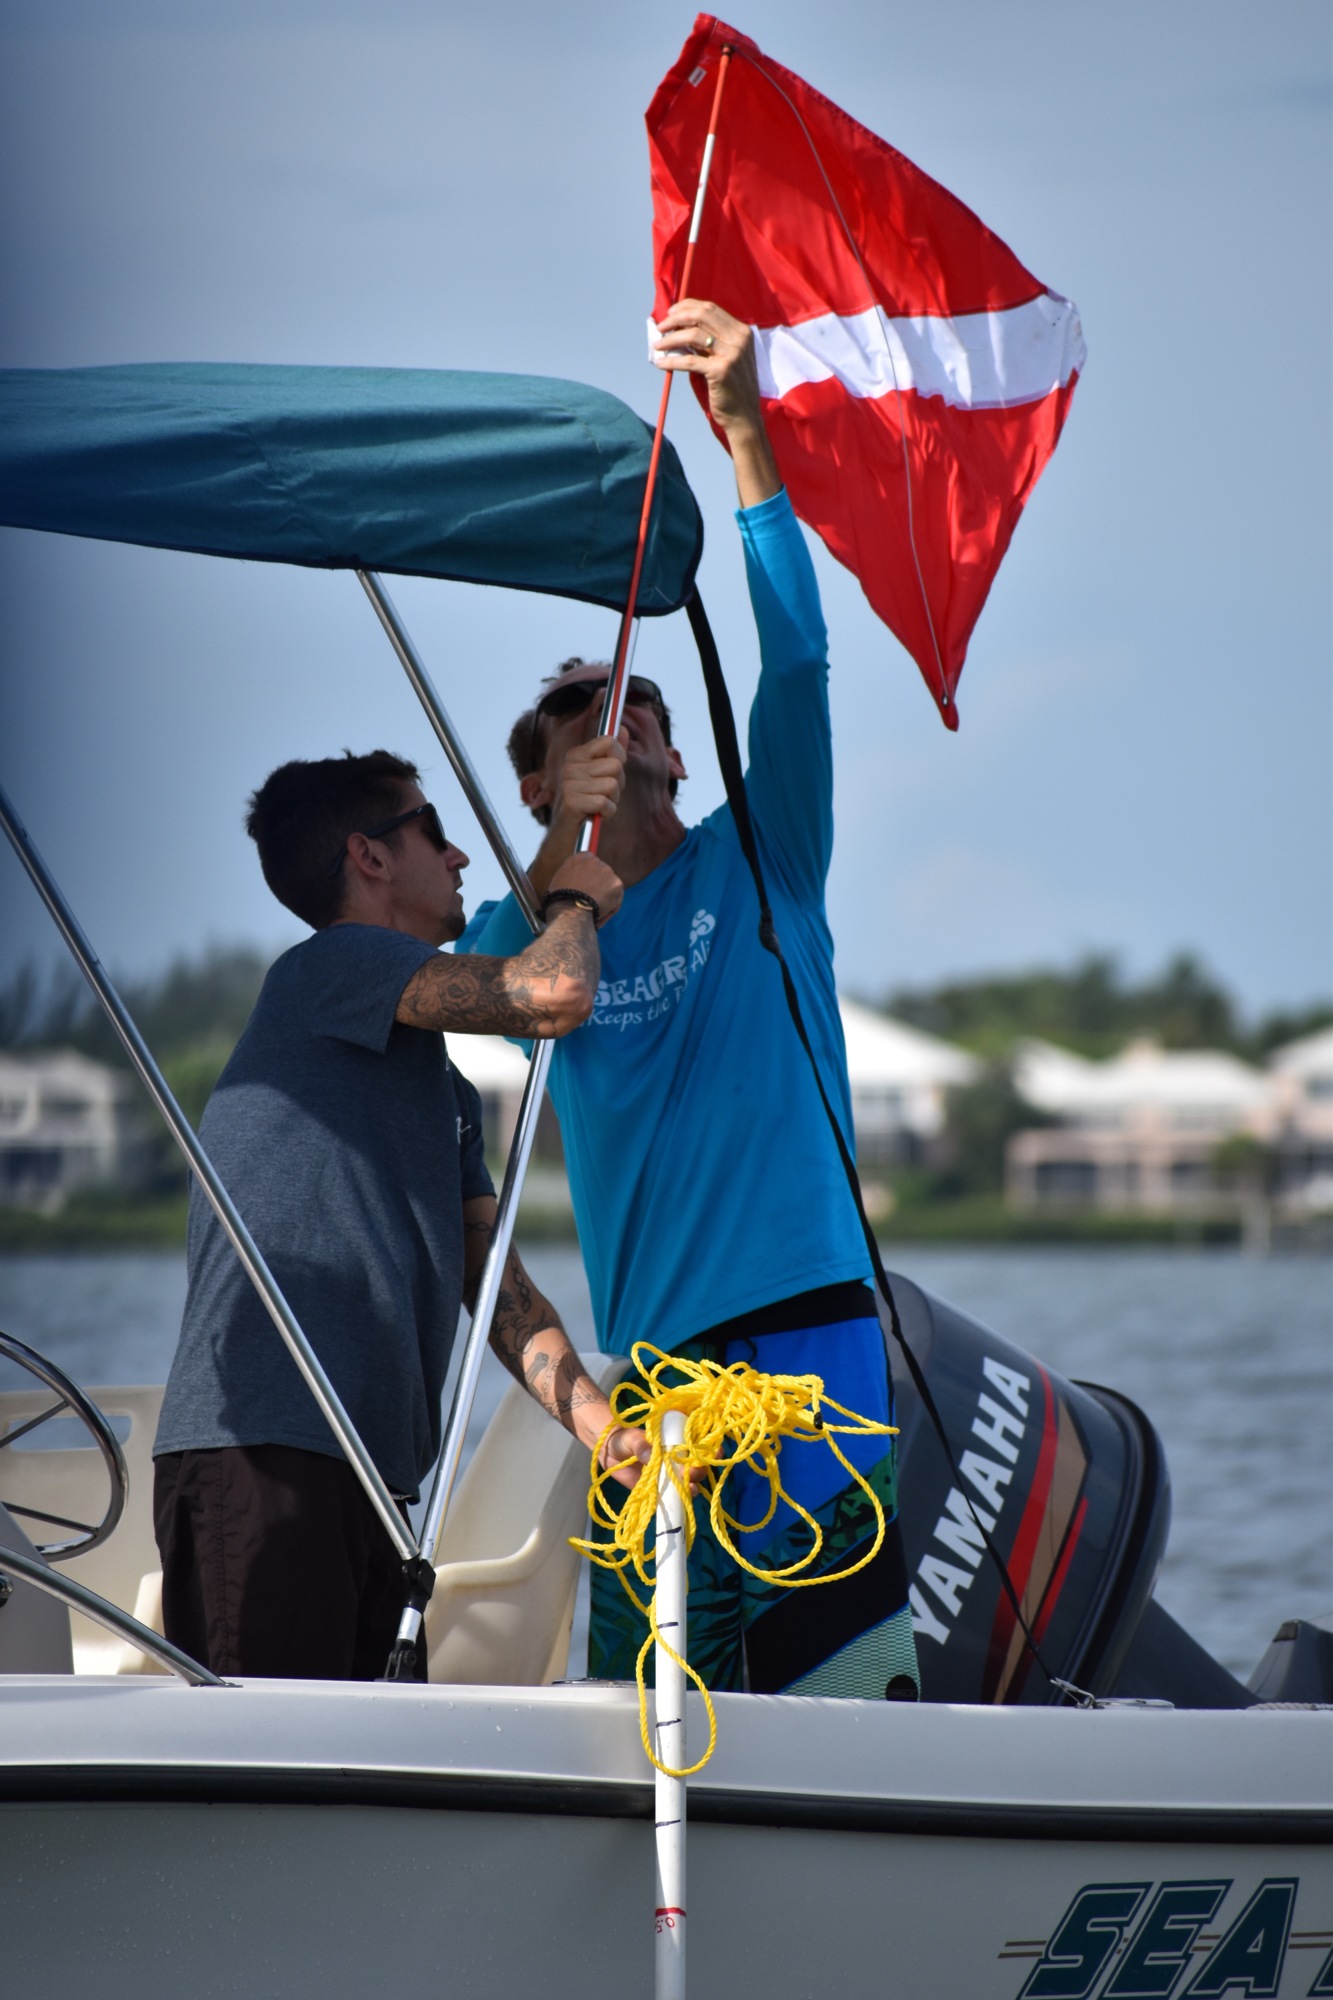 Nate Falcone and Peter Peduzzi raise the diver-down flag before snorklers went into Sarasota Bay just east of Longboat Key.